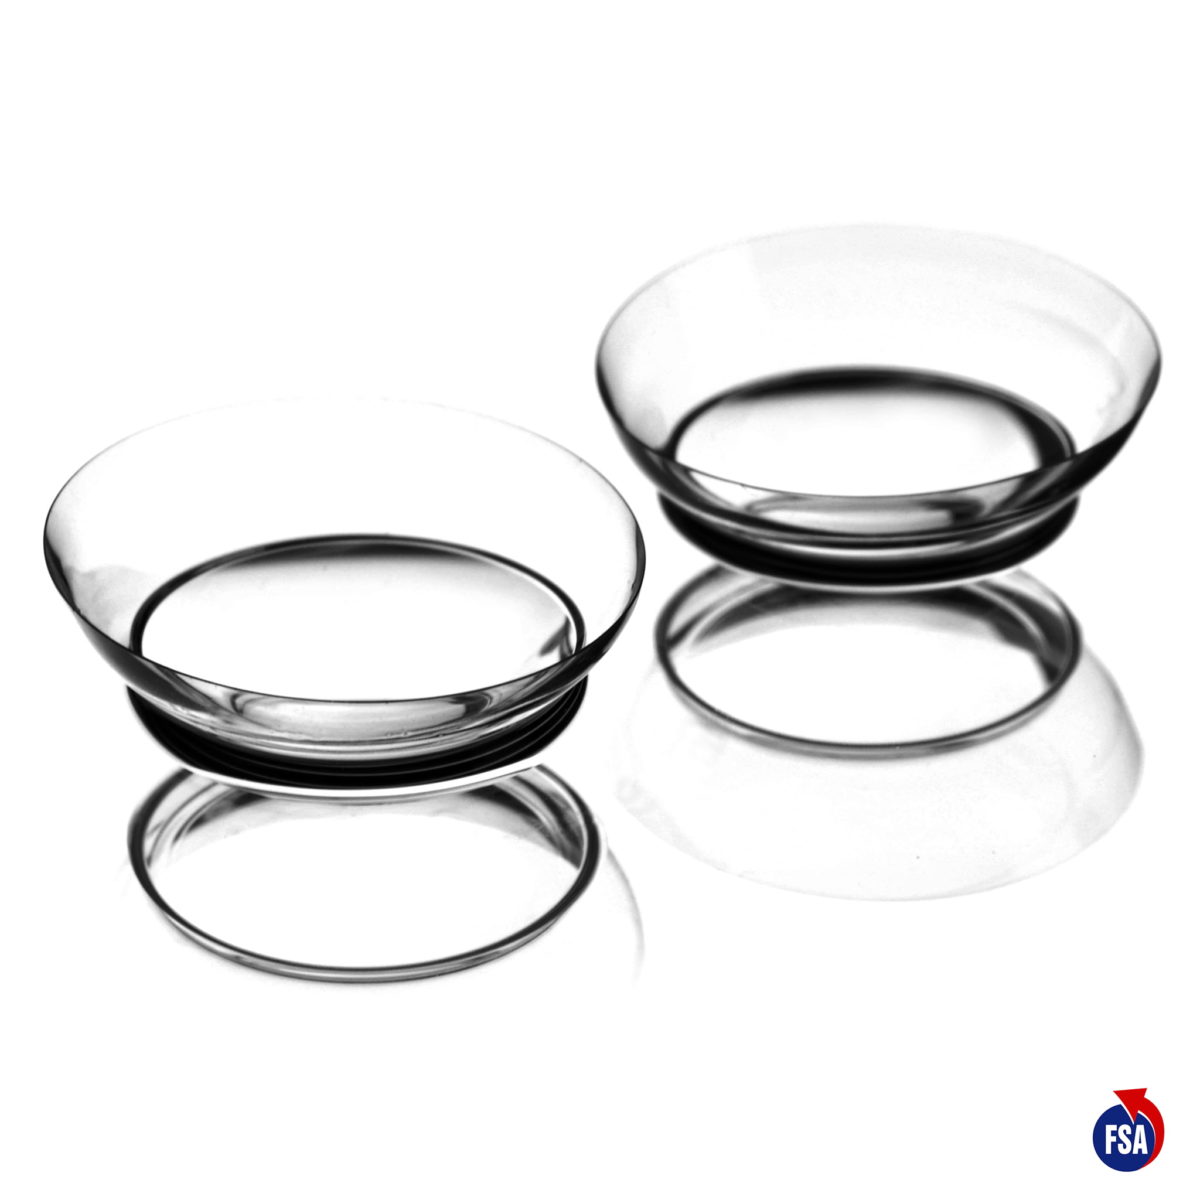 AC Lens Contact Lenses Review - Must Read This Before Buying